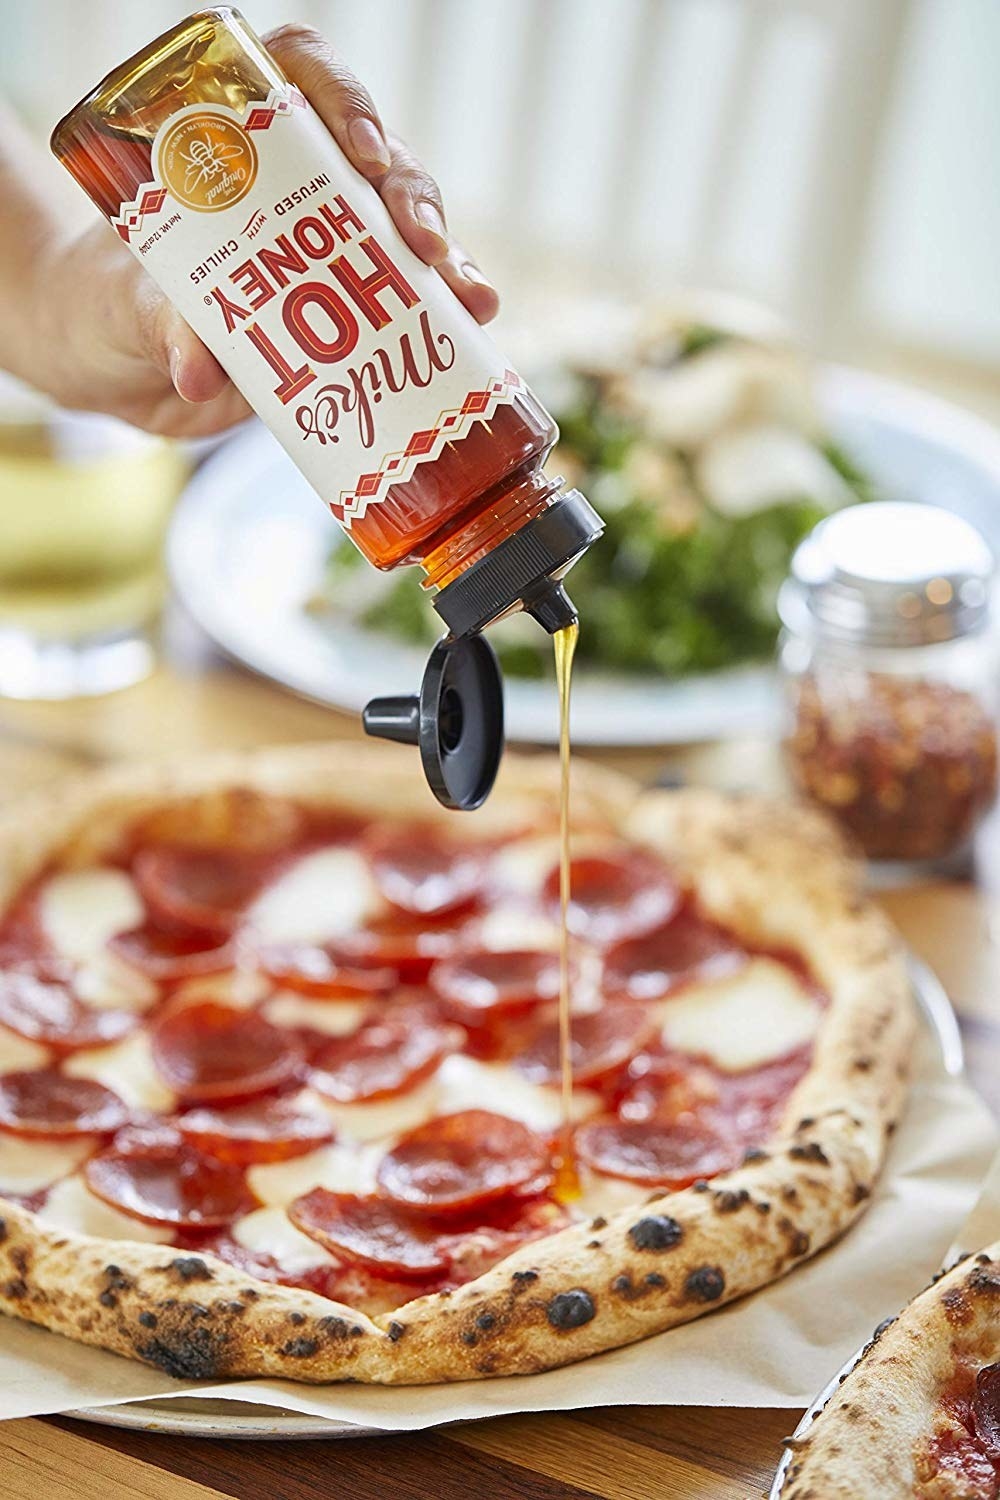 Hand pouring the honey on a pepperoni pizza